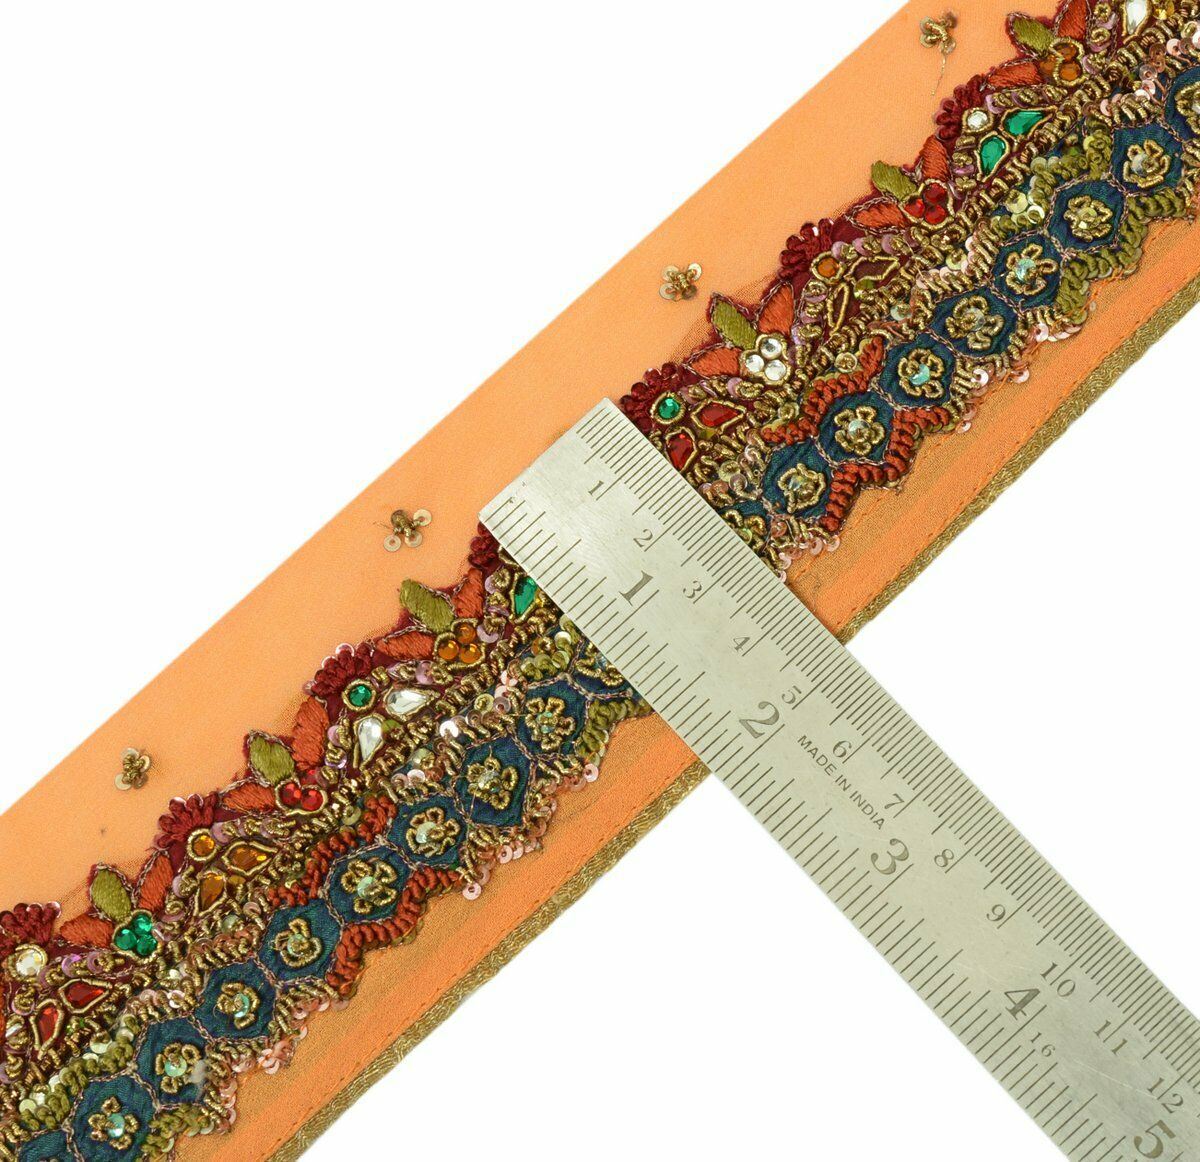 Antique Vintage Sari Border Indian Craft Trim Hand Beaded Embroidered Lace Peach